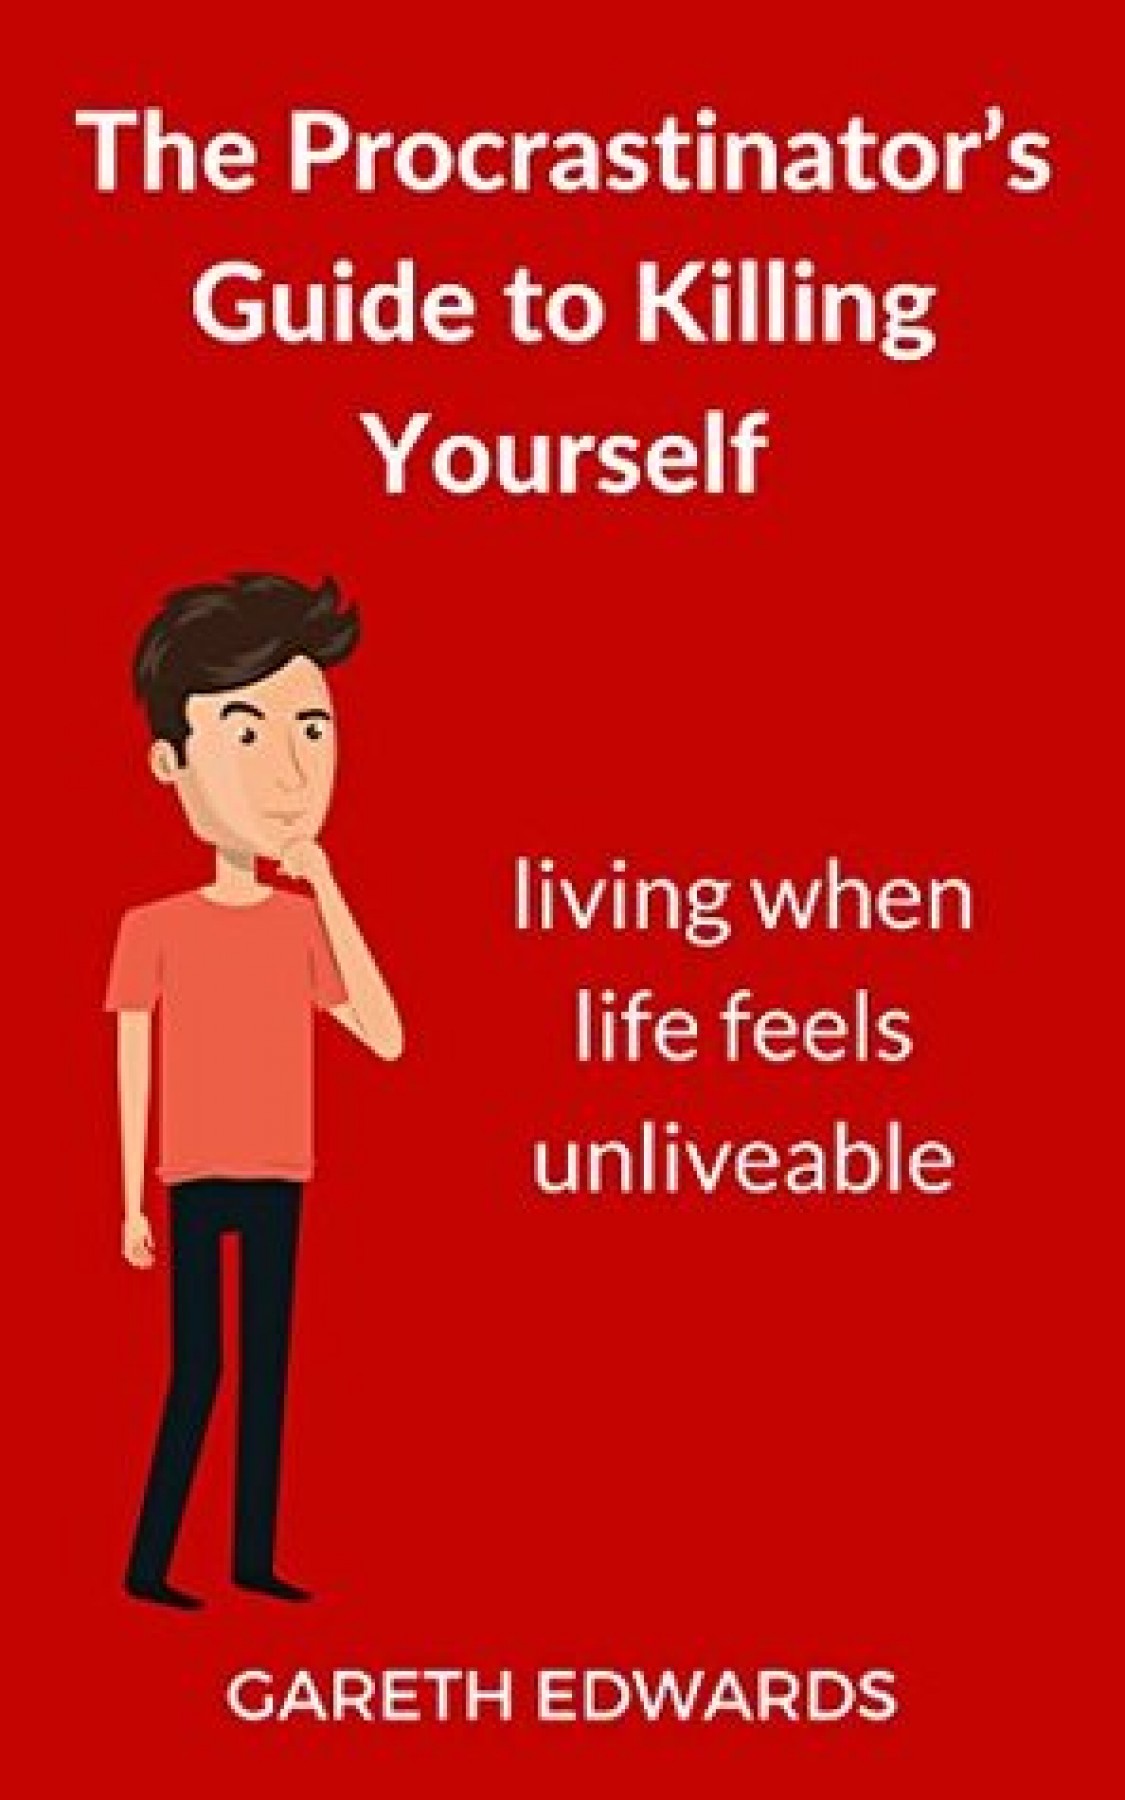 How To Kill Myself The procrastinator's guide to killing yourself: Living when life feels  unliveable | Mental Health Foundation